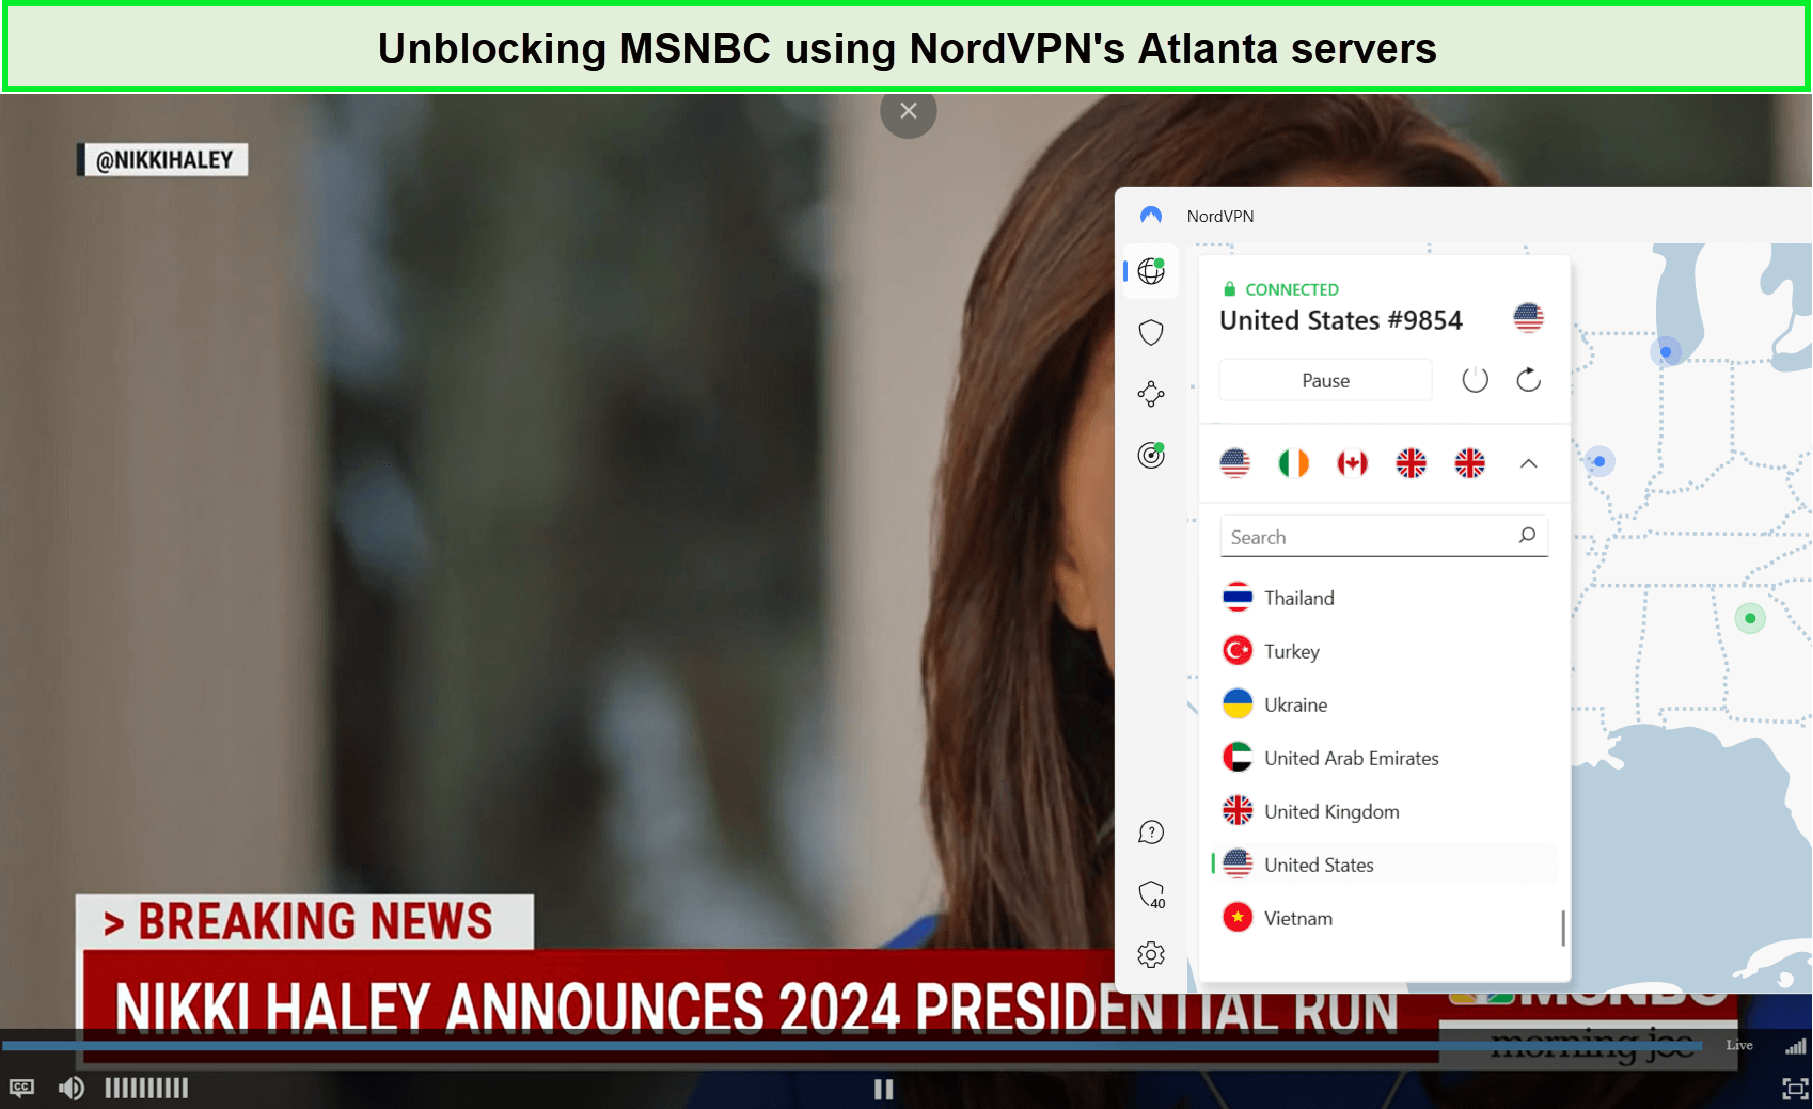 unblocking-msnbs-using-nordvpn-in-Netherlands